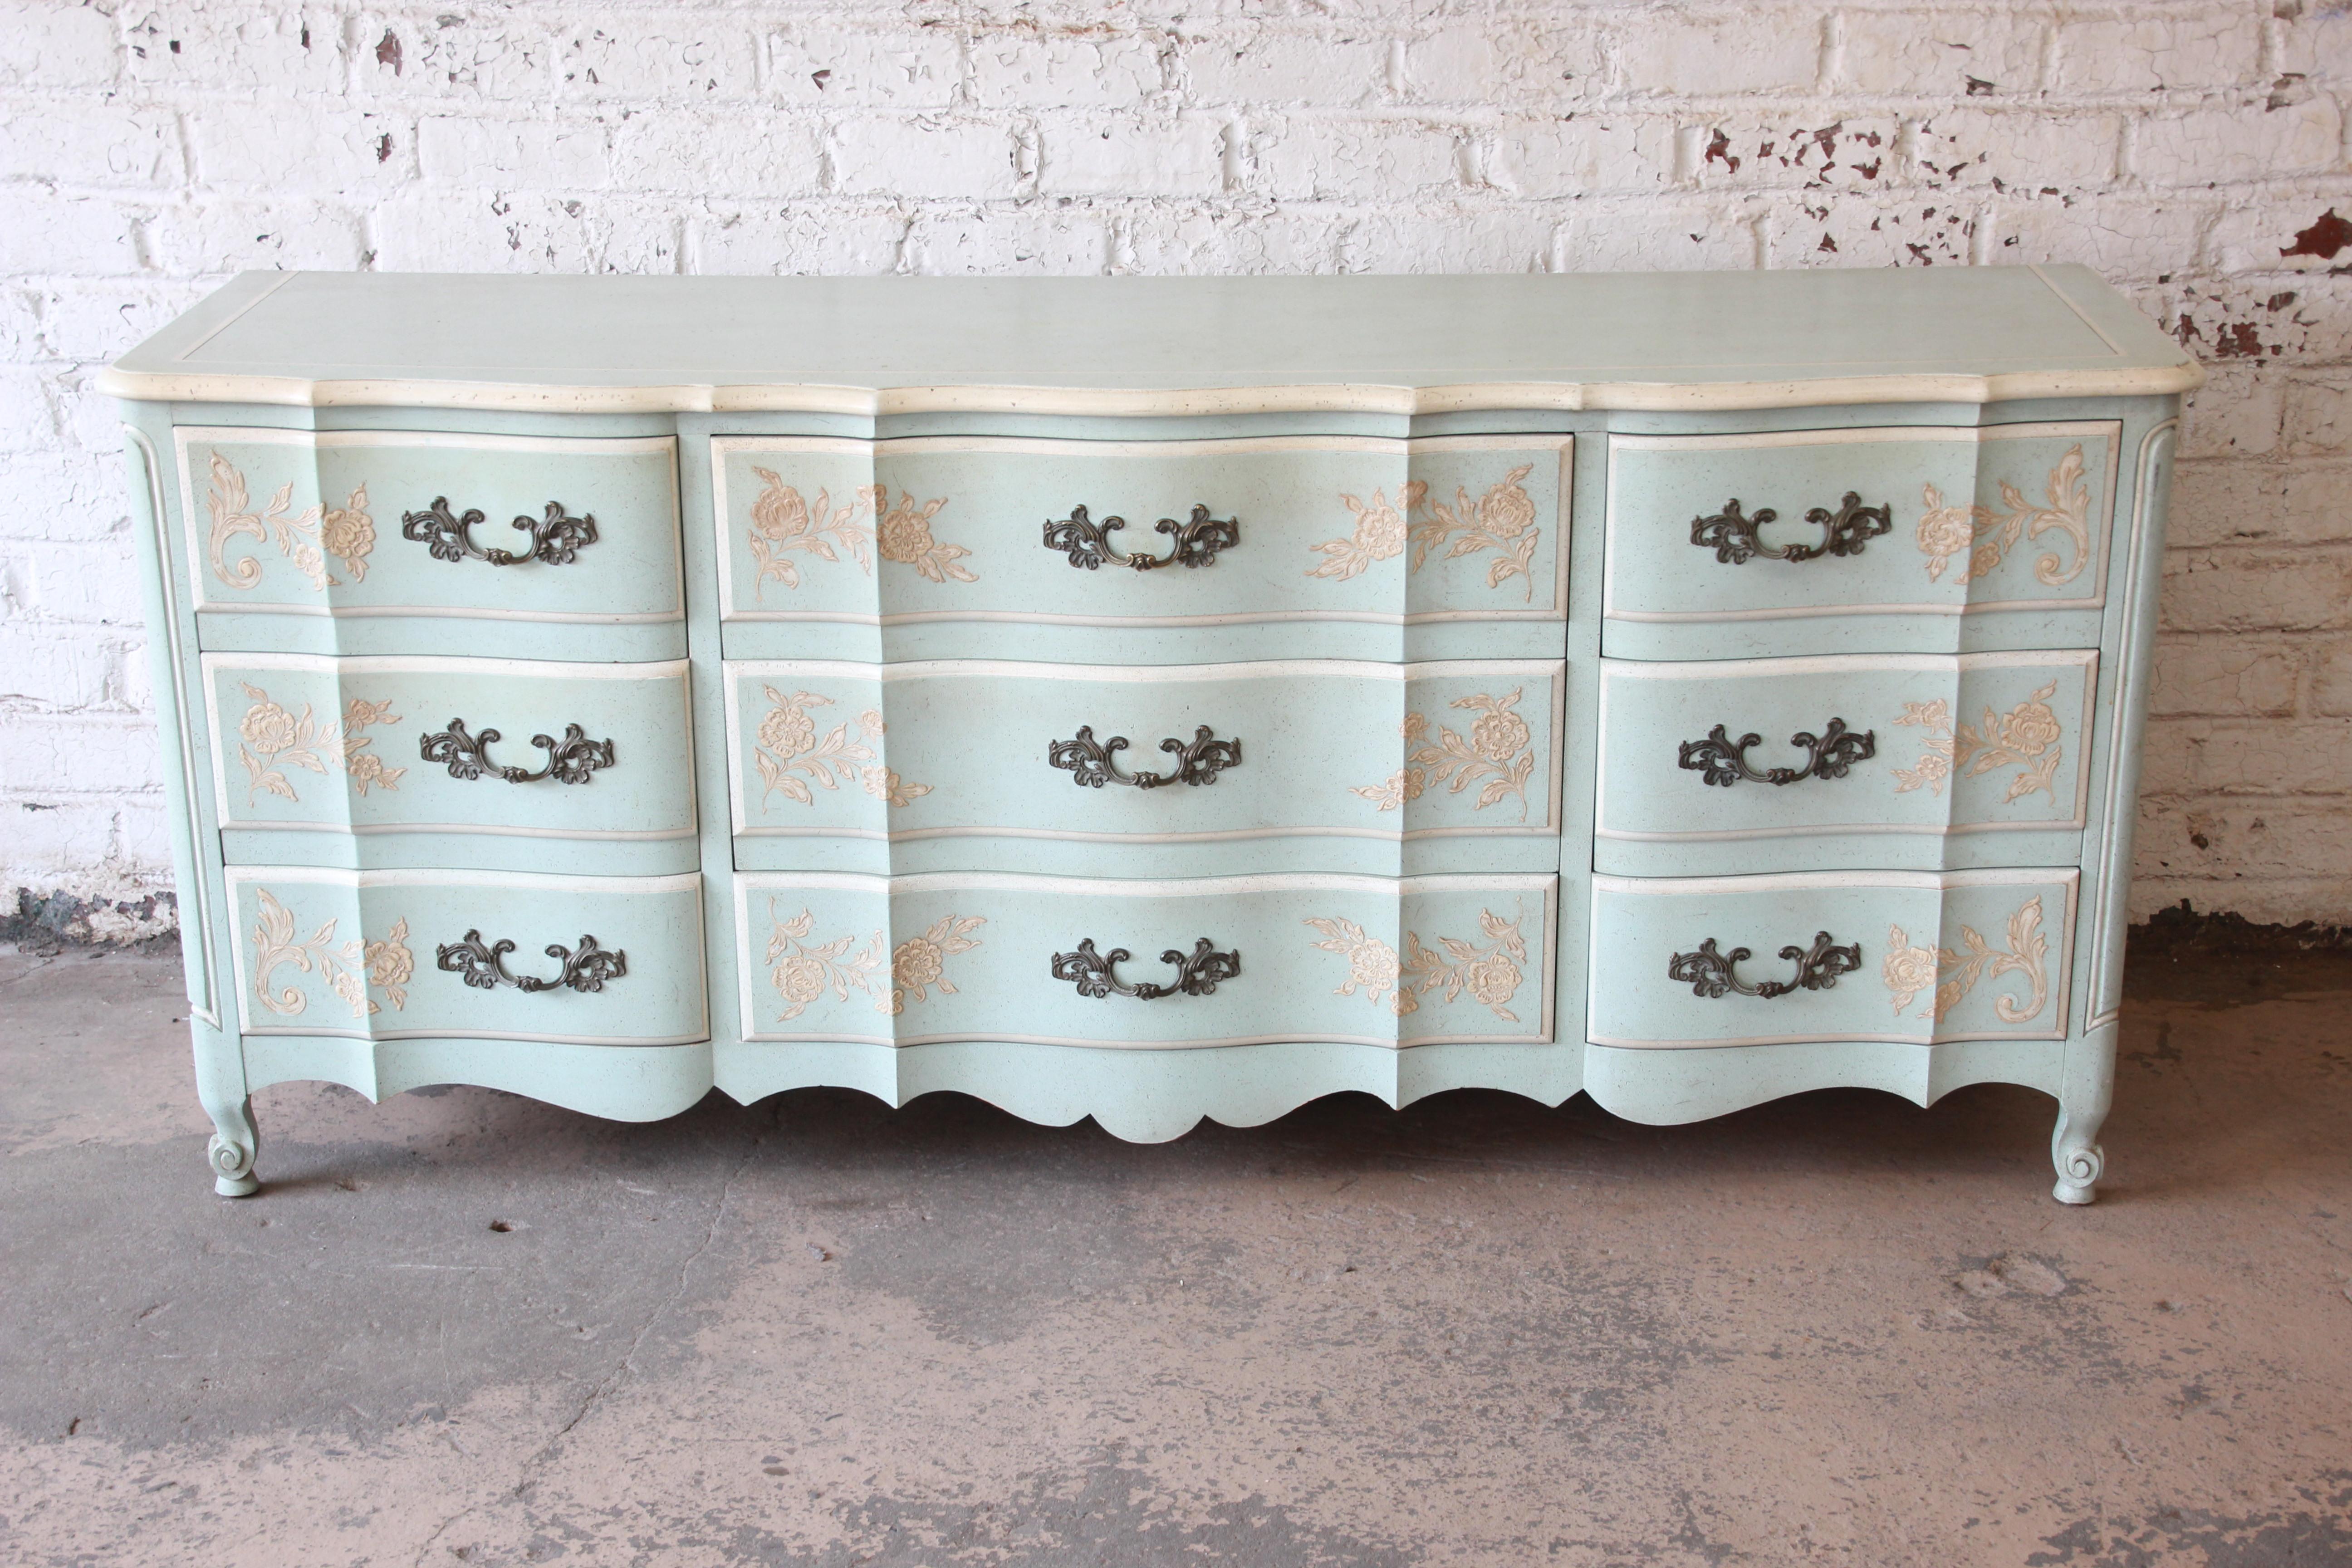 Offering a very nice French provincial Louis XV style dresser by John Widdicomb. The exceptional solid wood piece has a nice light blue shabby chic finish with nine large drawers and classic French details. The piece is in very good vintage